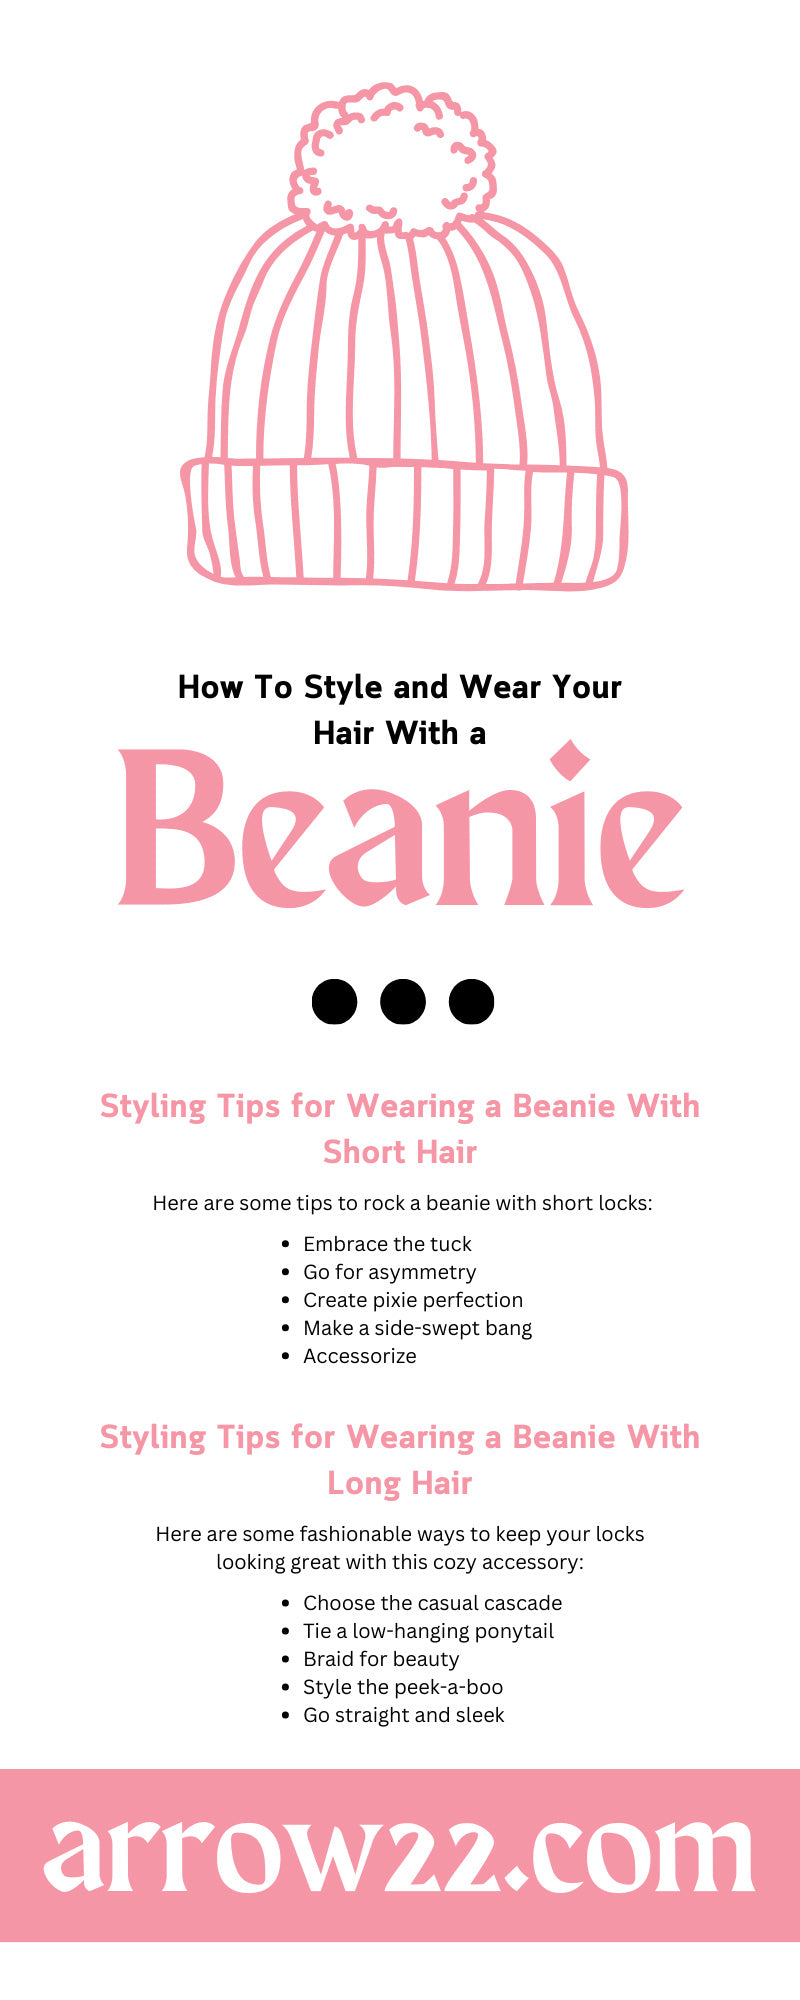 How To Style and Wear Your Hair With a Beanie